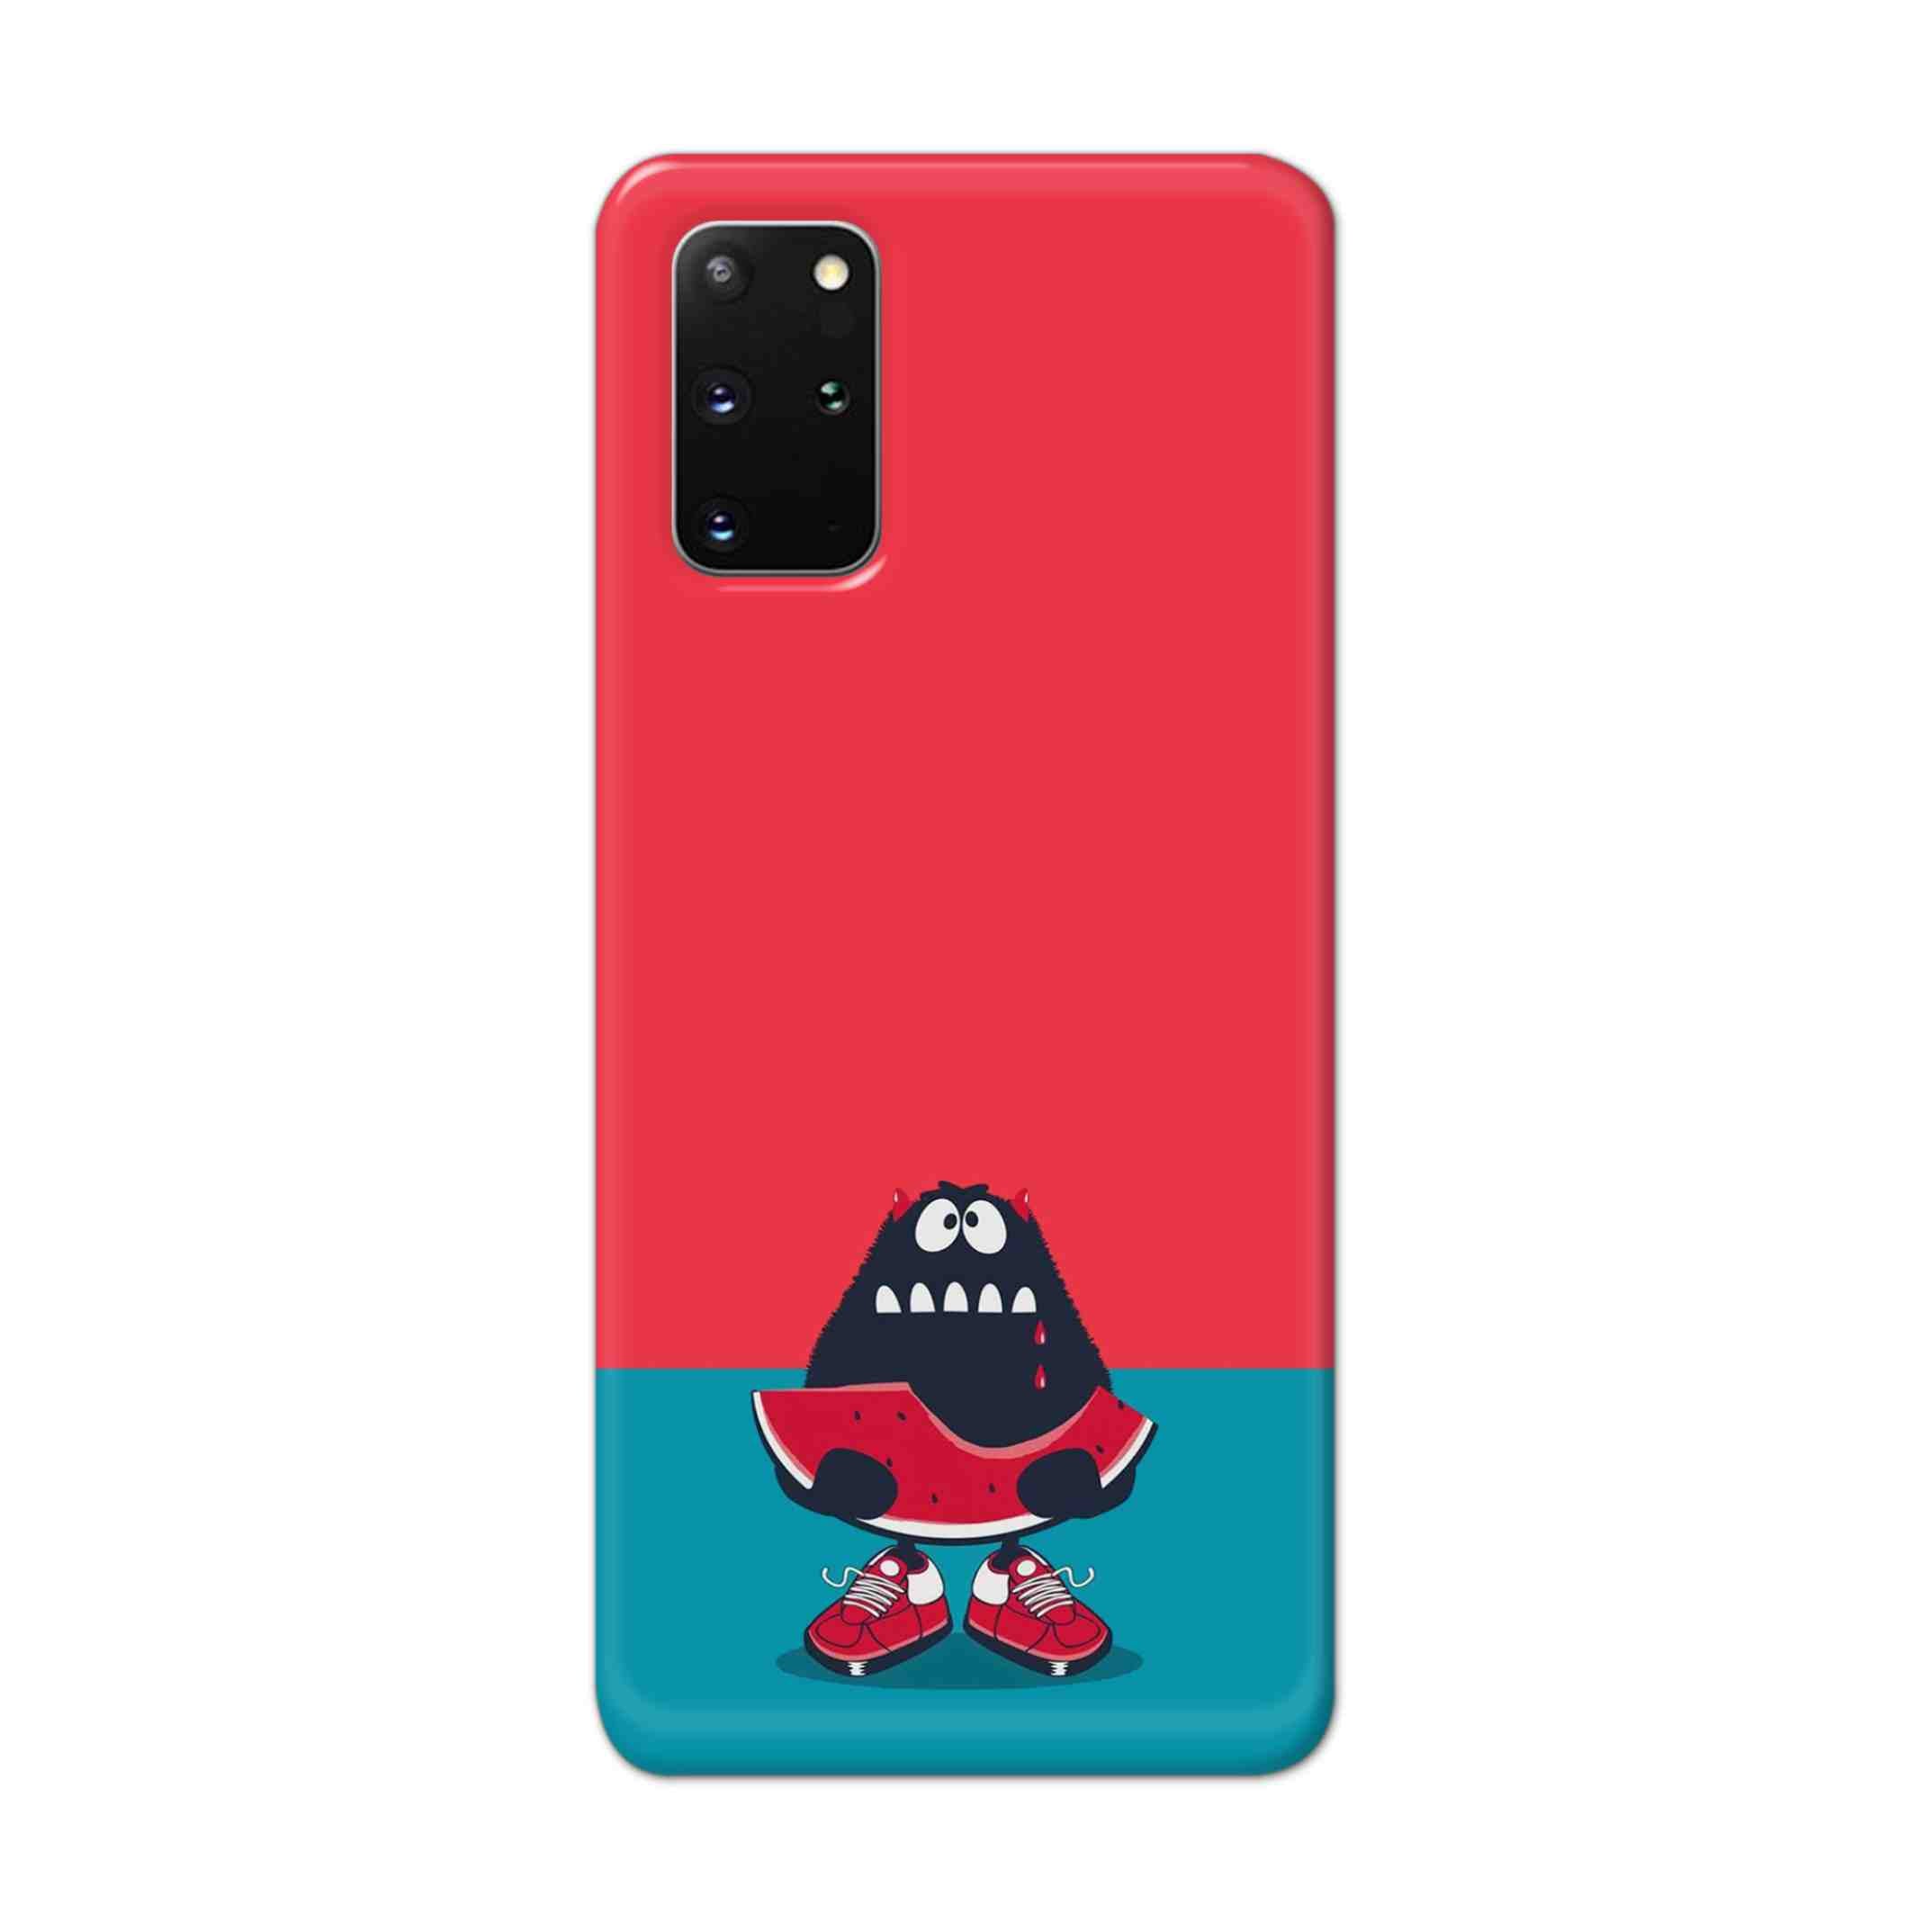 Buy Watermelon Hard Back Mobile Phone Case Cover For Samsung Galaxy S20 Plus Online